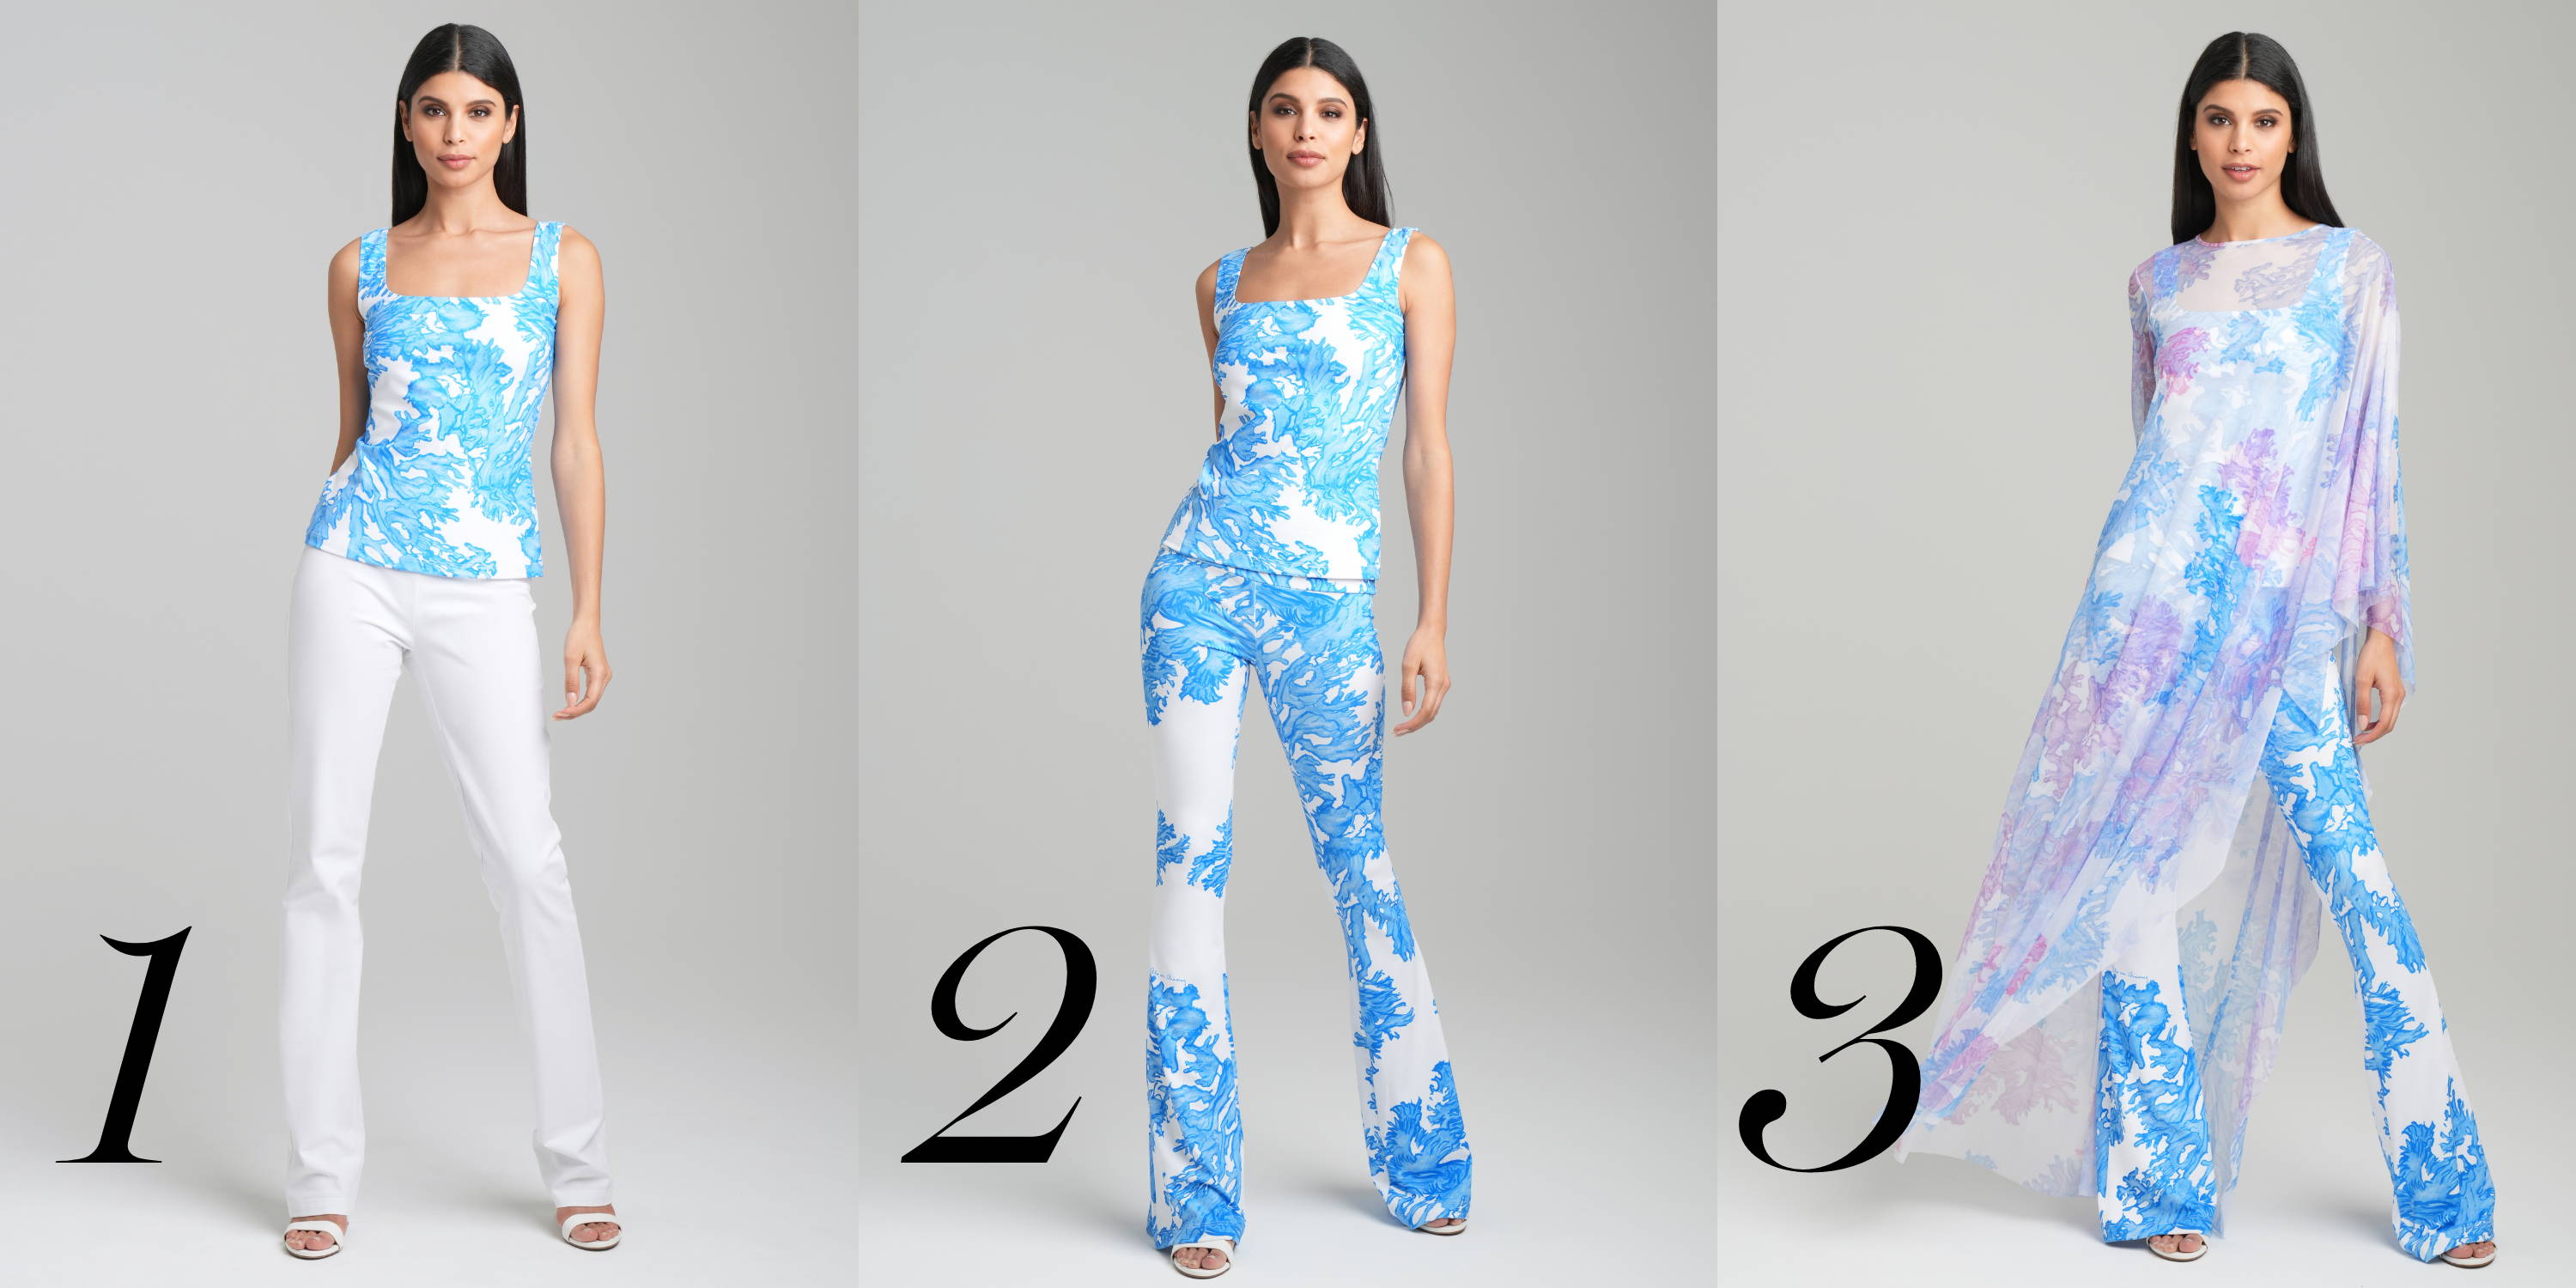 Woman building a 3 piece outfit by starting with a stretch knit tank top in a blue coral printed with matching pants and then a mesh cover up on top by Ala von Auersperg